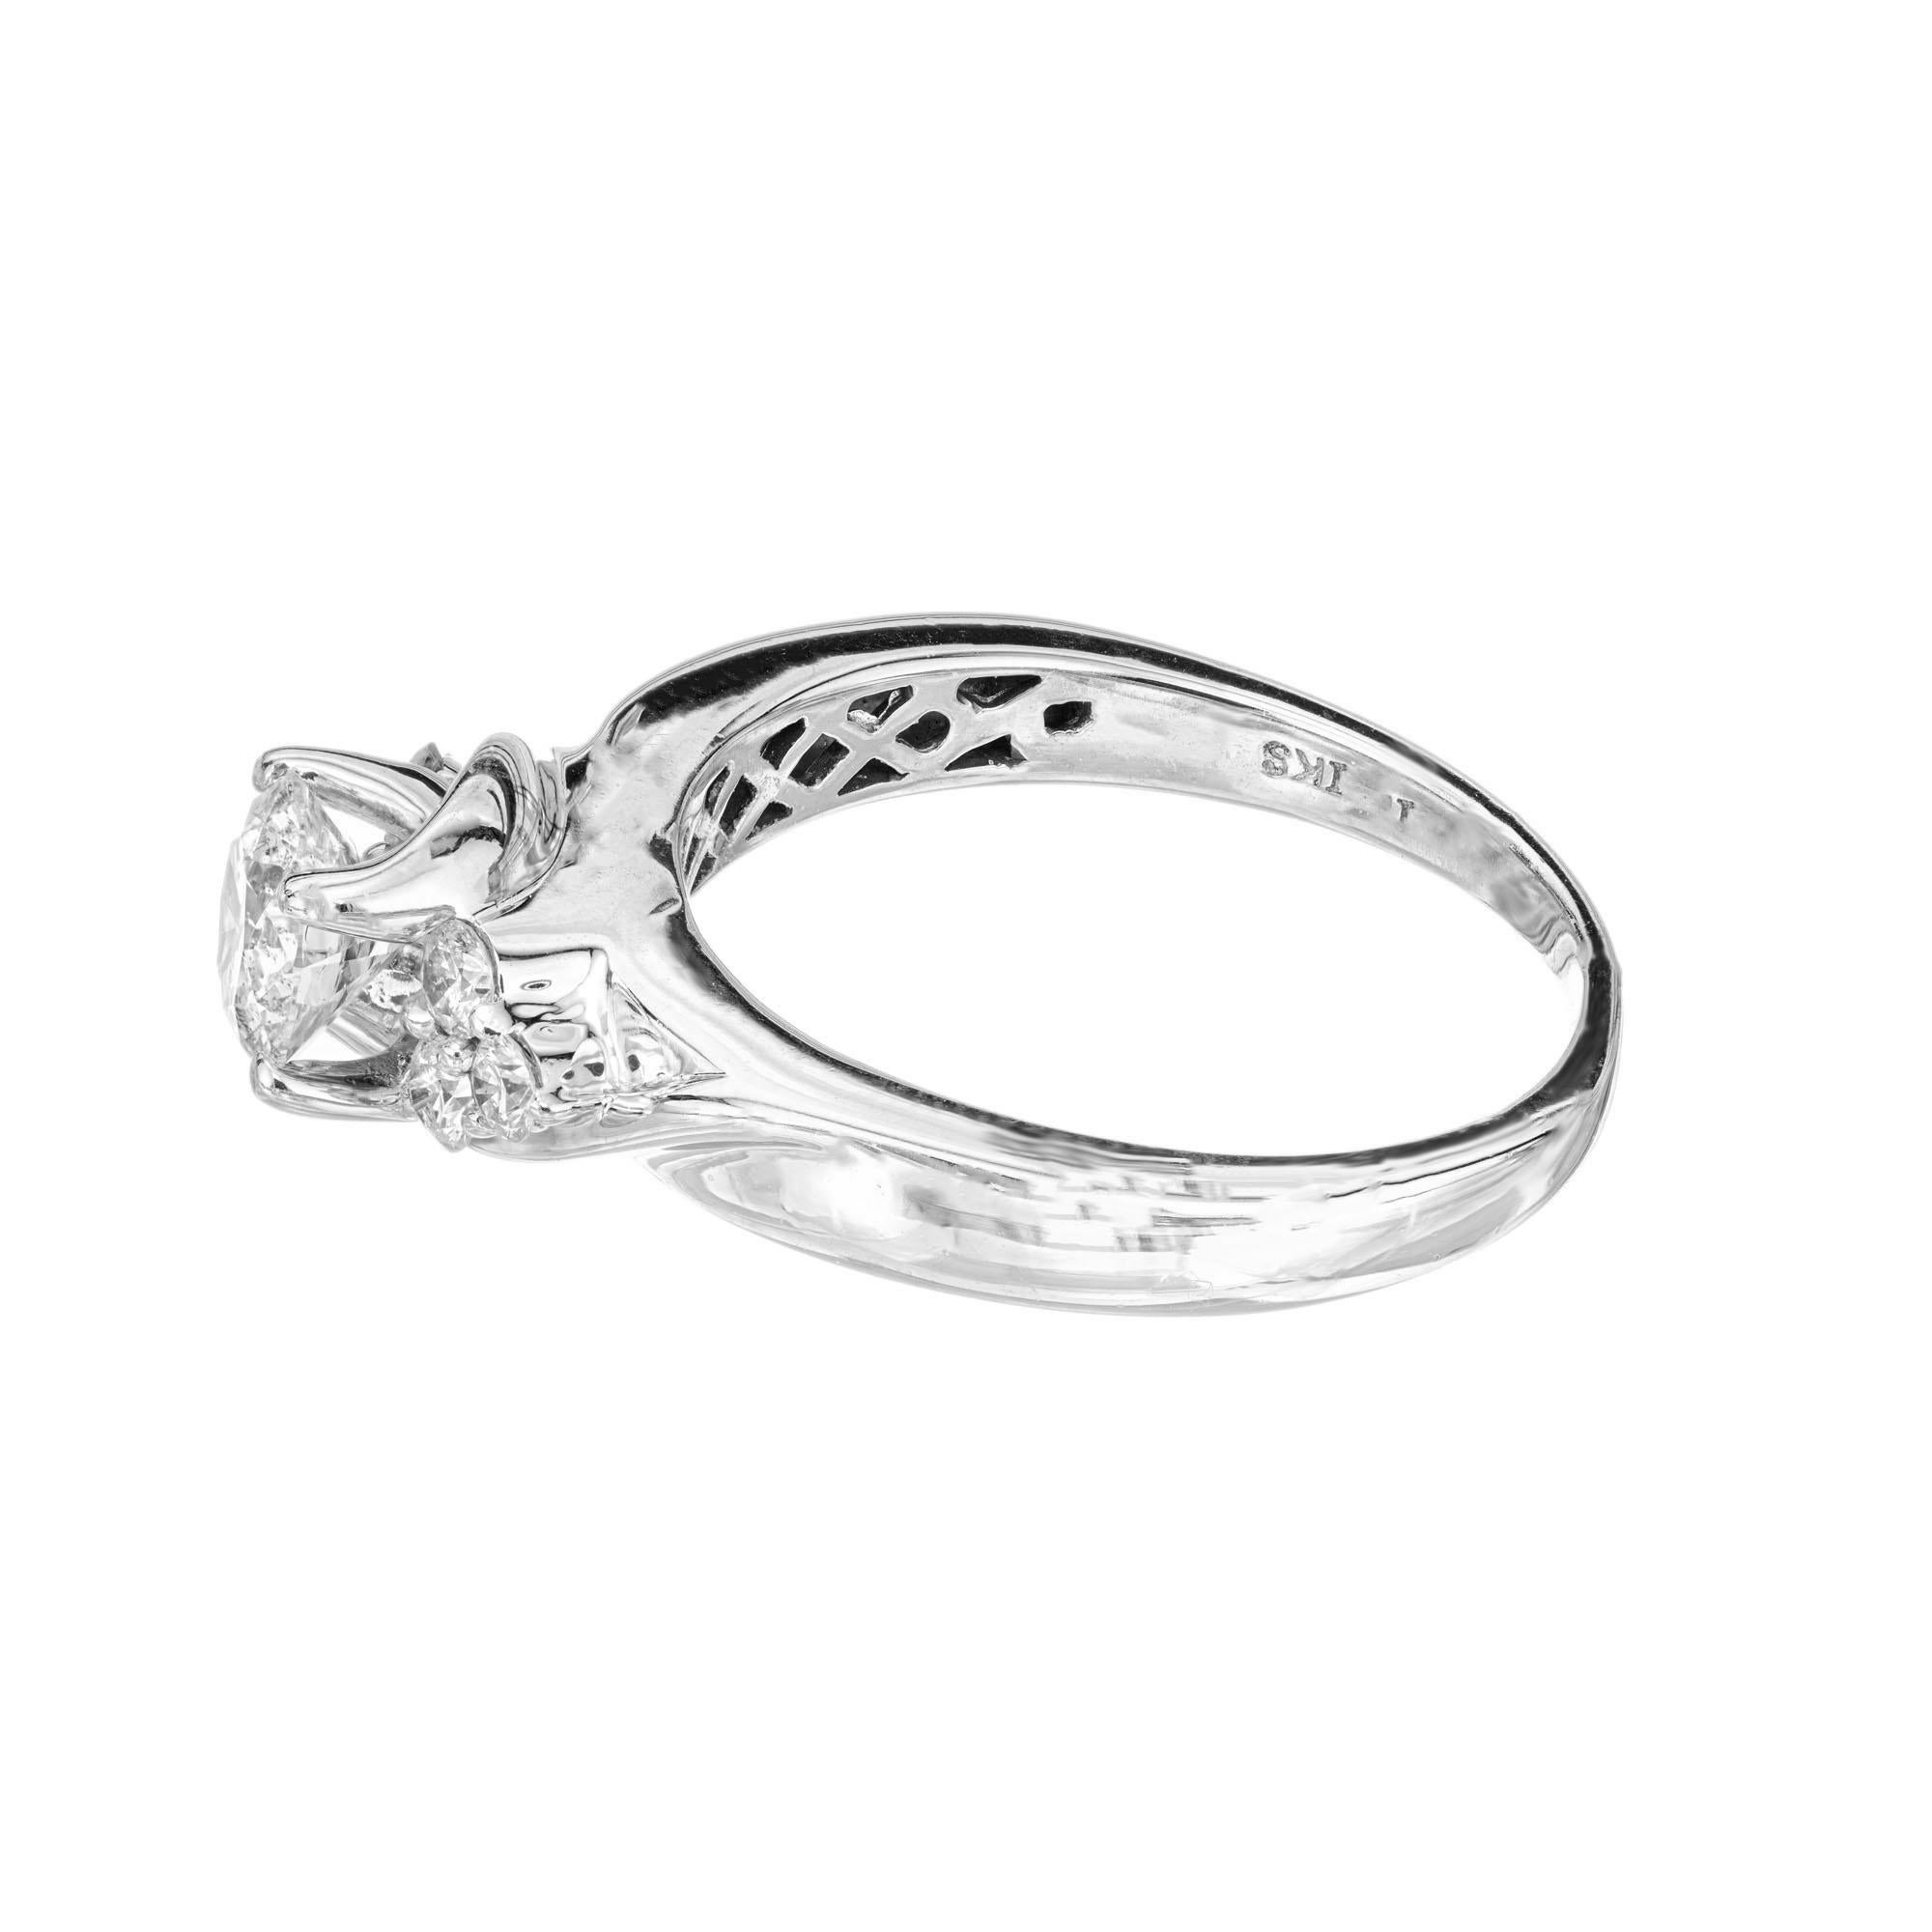 Women's EGL Certified 1.00 Carat Diamond White Gold Engagement Ring For Sale